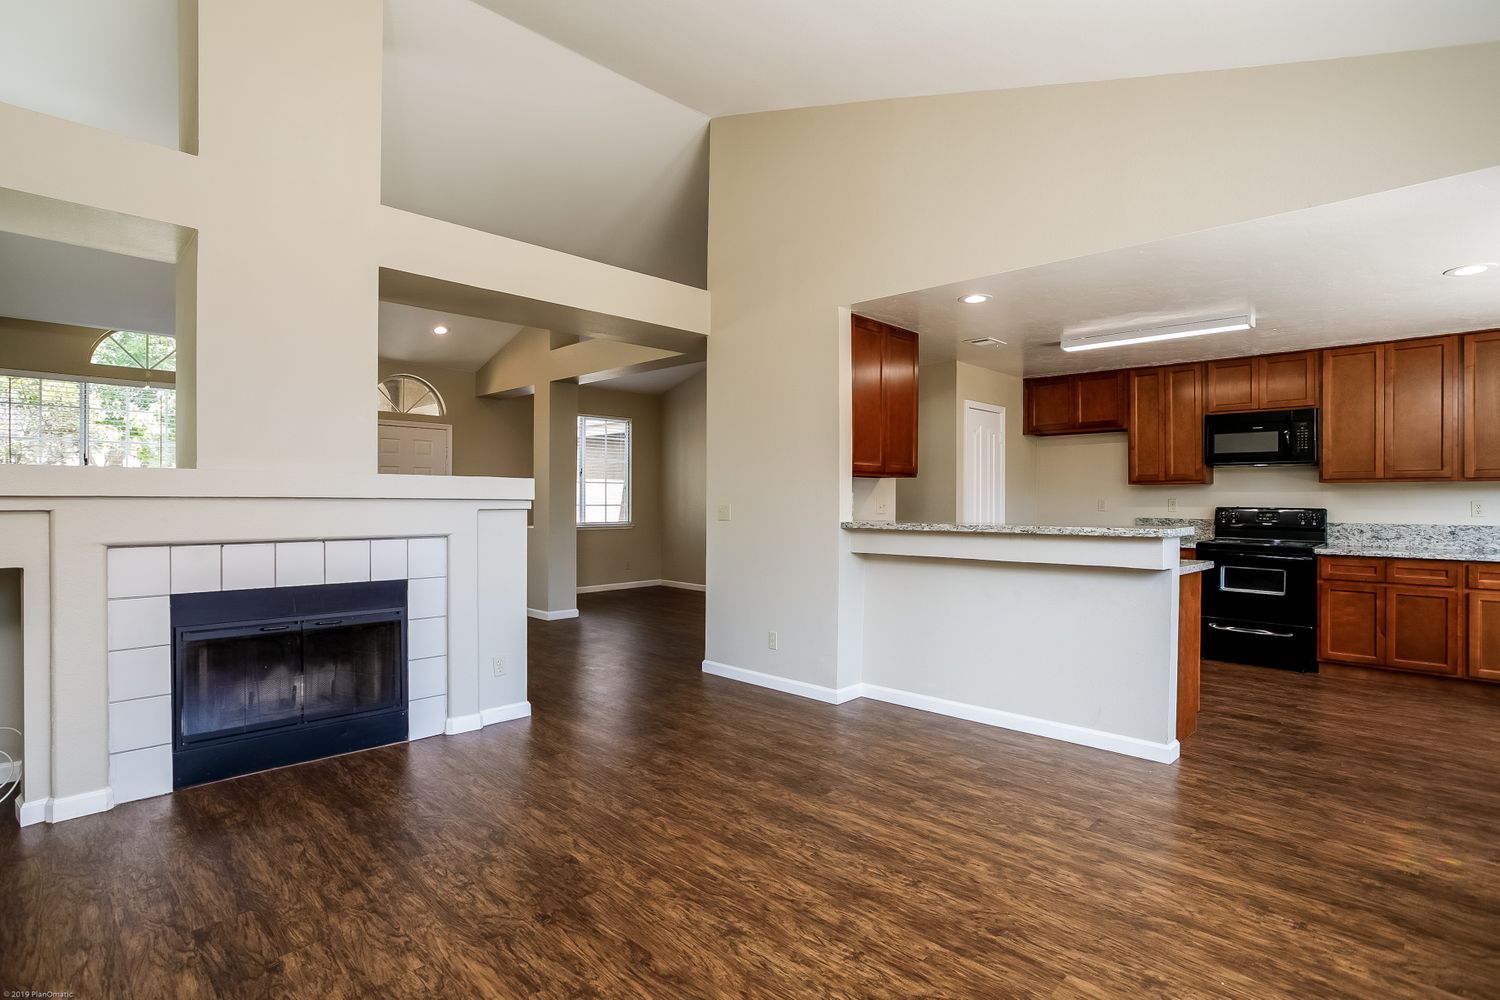 Kitchen and living room with fireplace and luxury-vinyl plank flooring at Invitation Homes Northern CA.